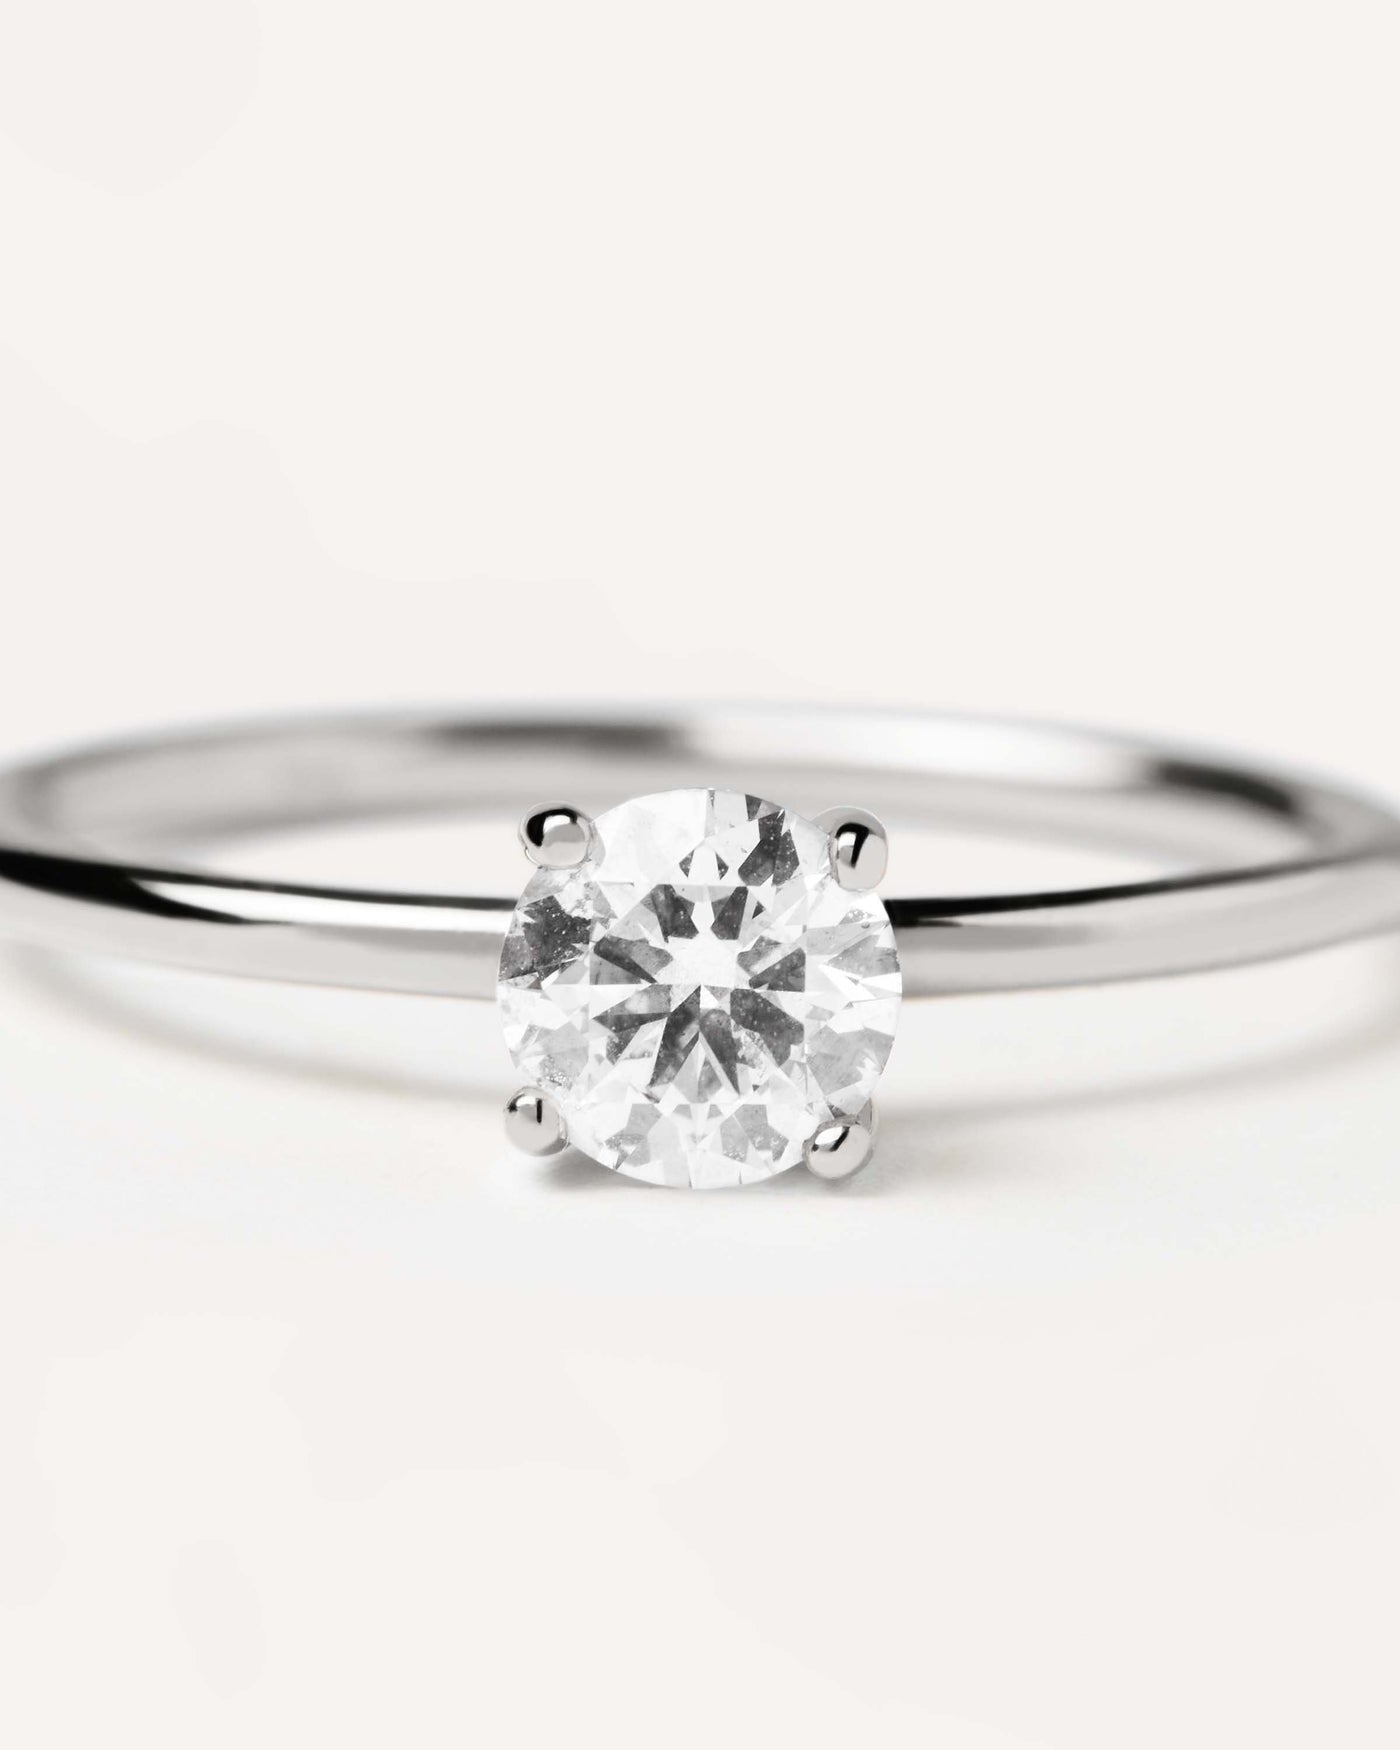 Diamonds and White Gold Solitaire Supreme Ring - 18K solid white gold